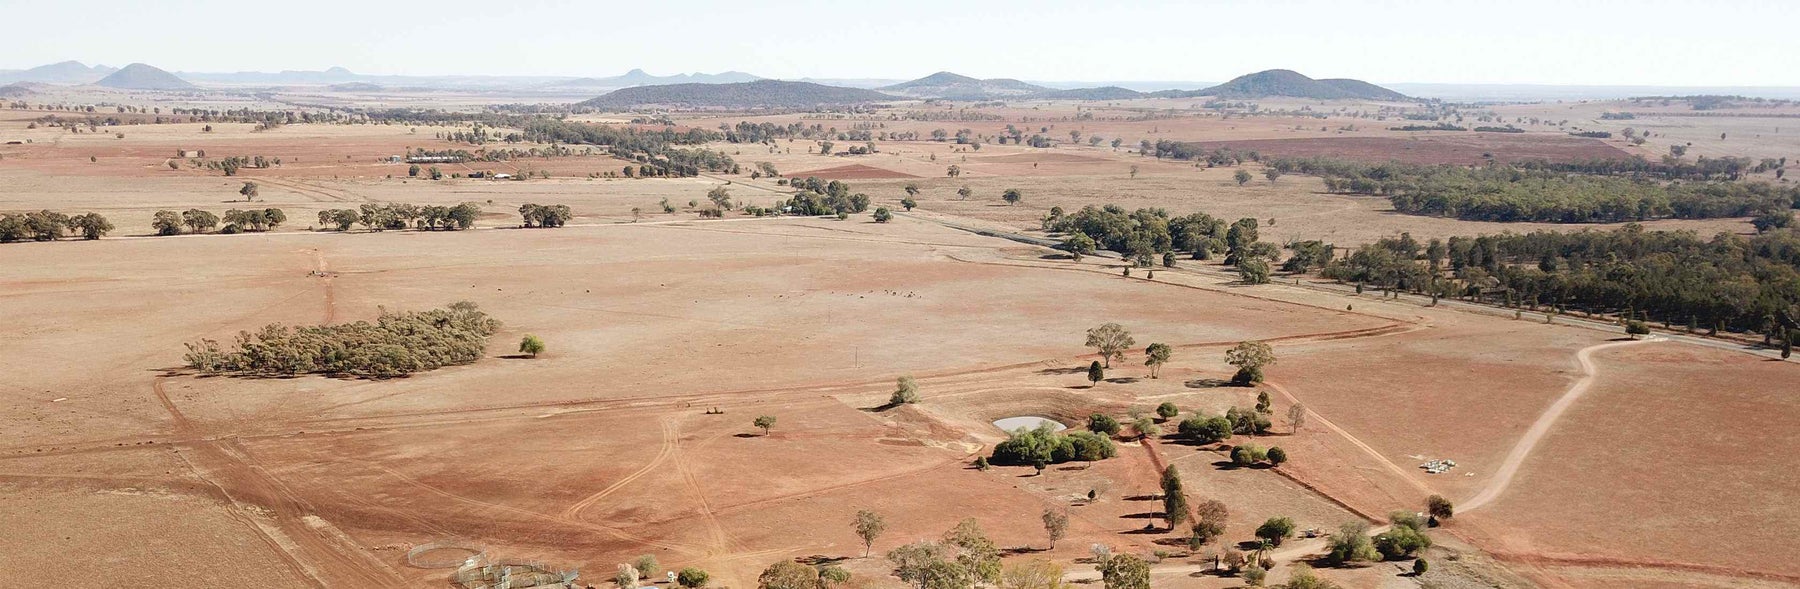 A country-side affected by drought